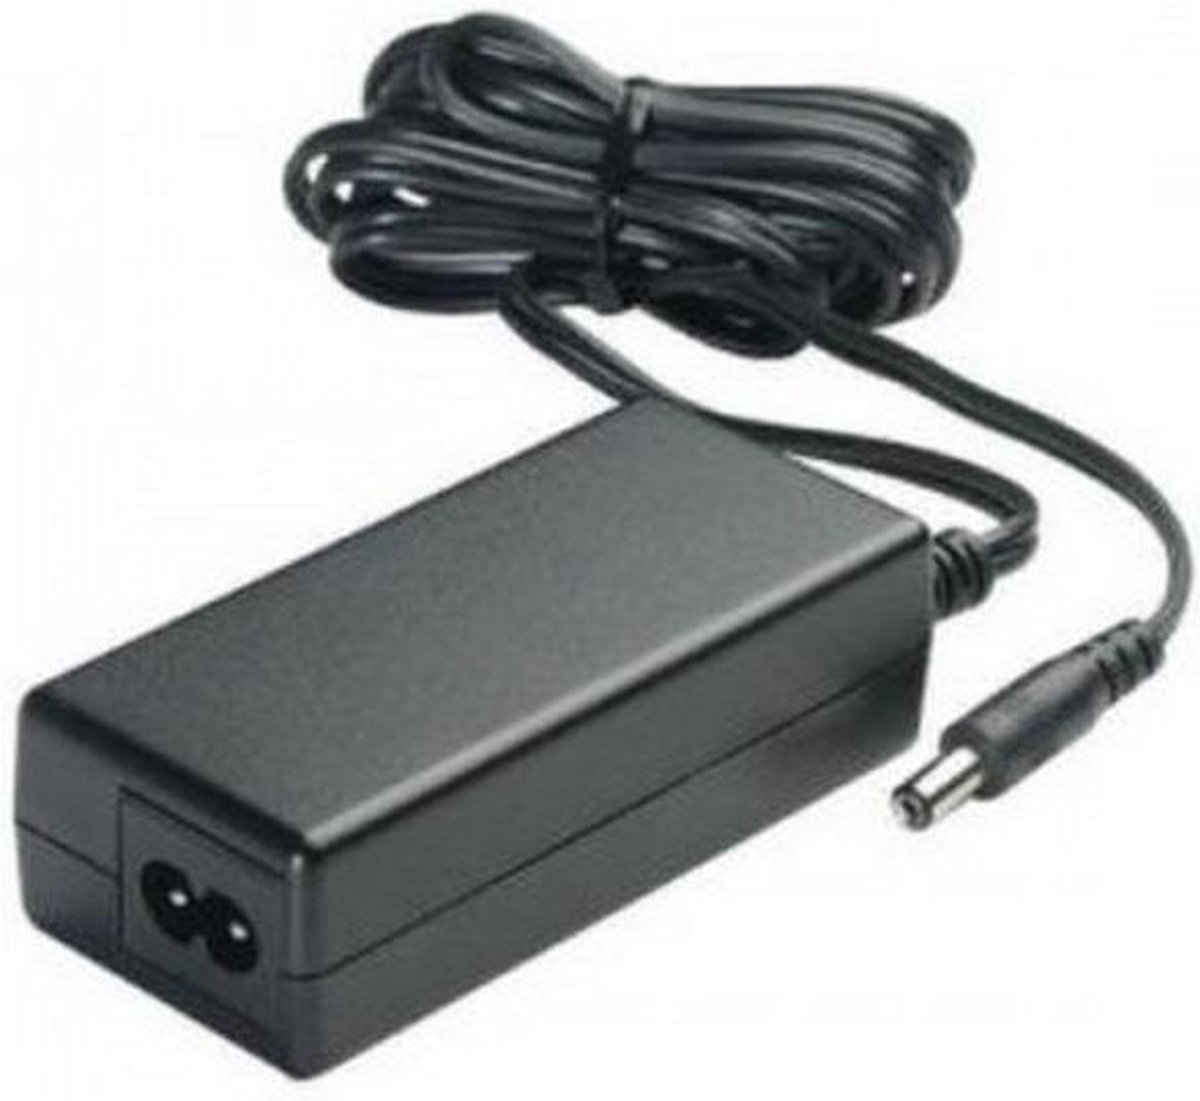 Polycom (Delta) Universal Power Supply for SoundPoint IP 560 and 670, VVX 500 and VVX 1500, 48V, 0.38A